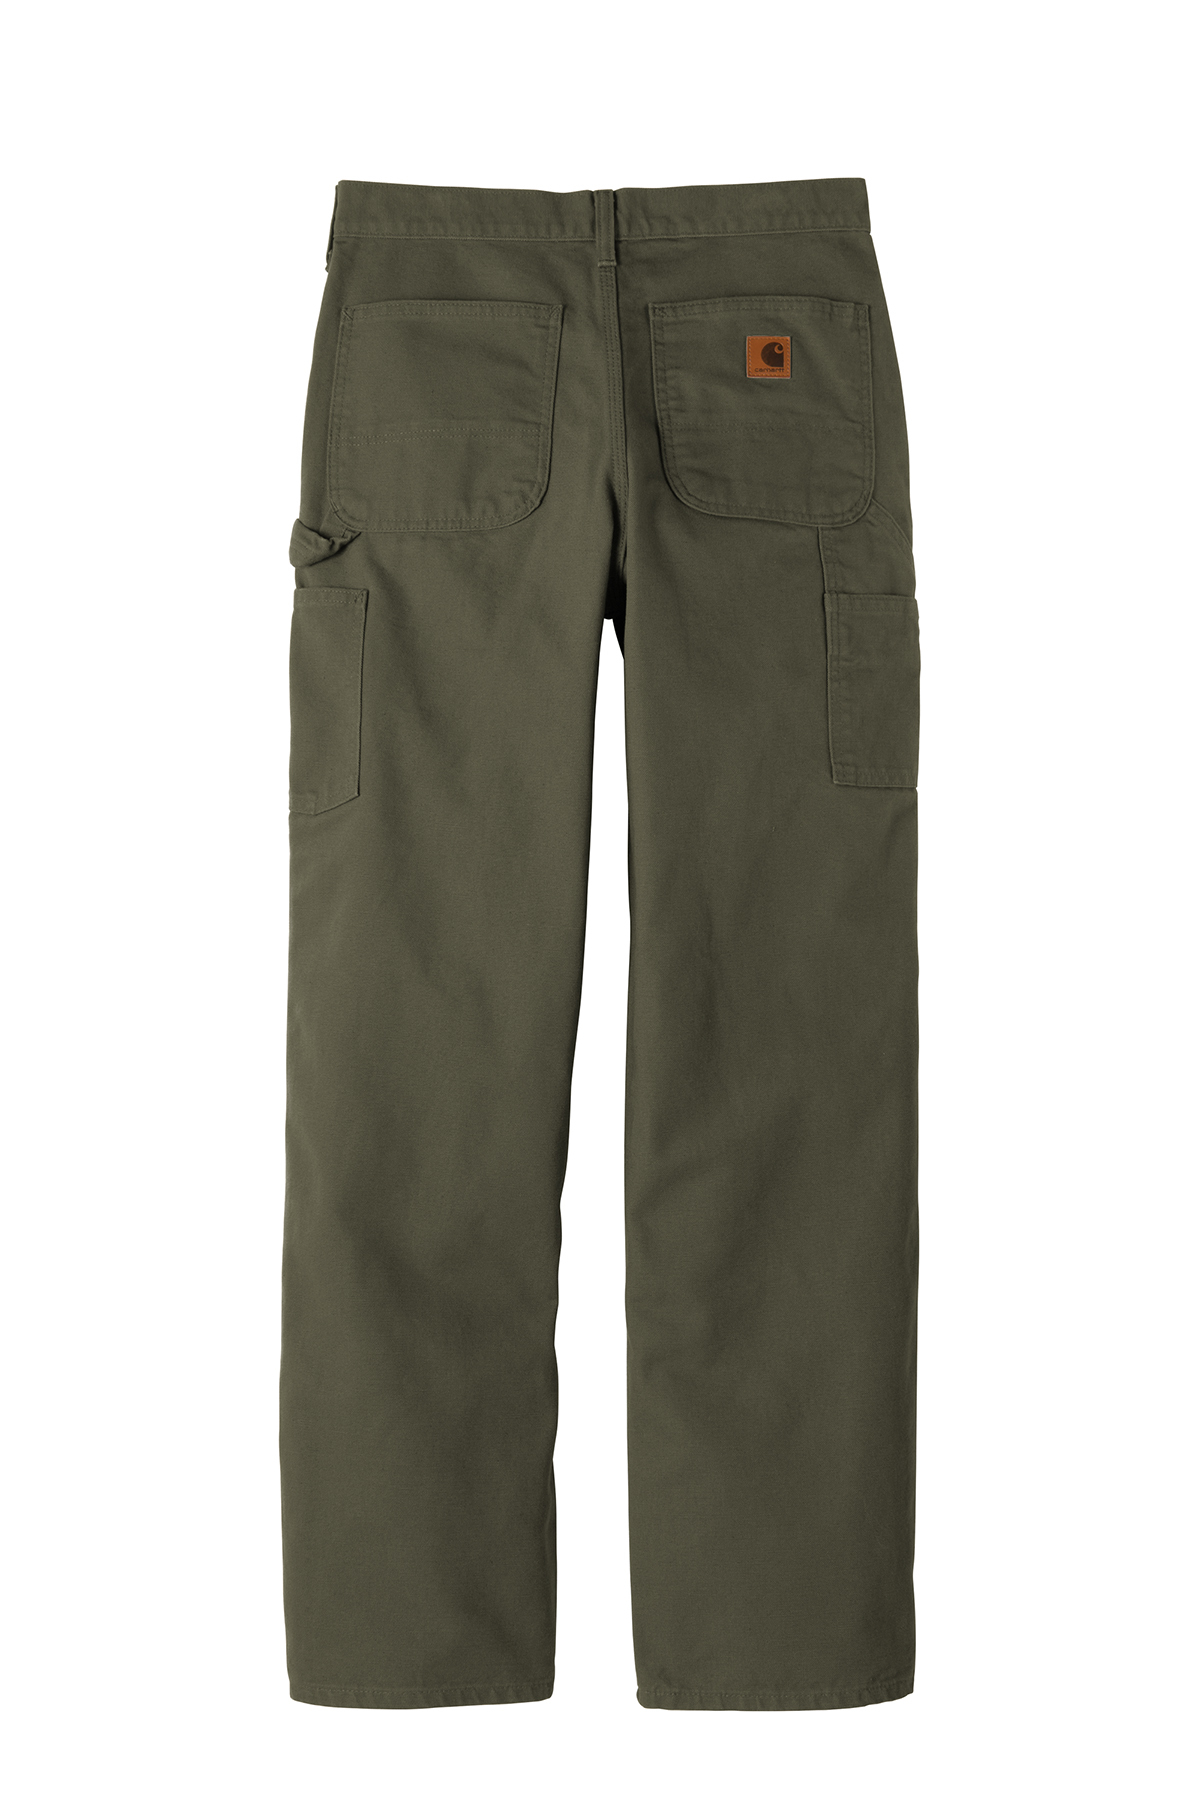 Carhartt Washed-Duck Work Dungaree | Product | SanMar